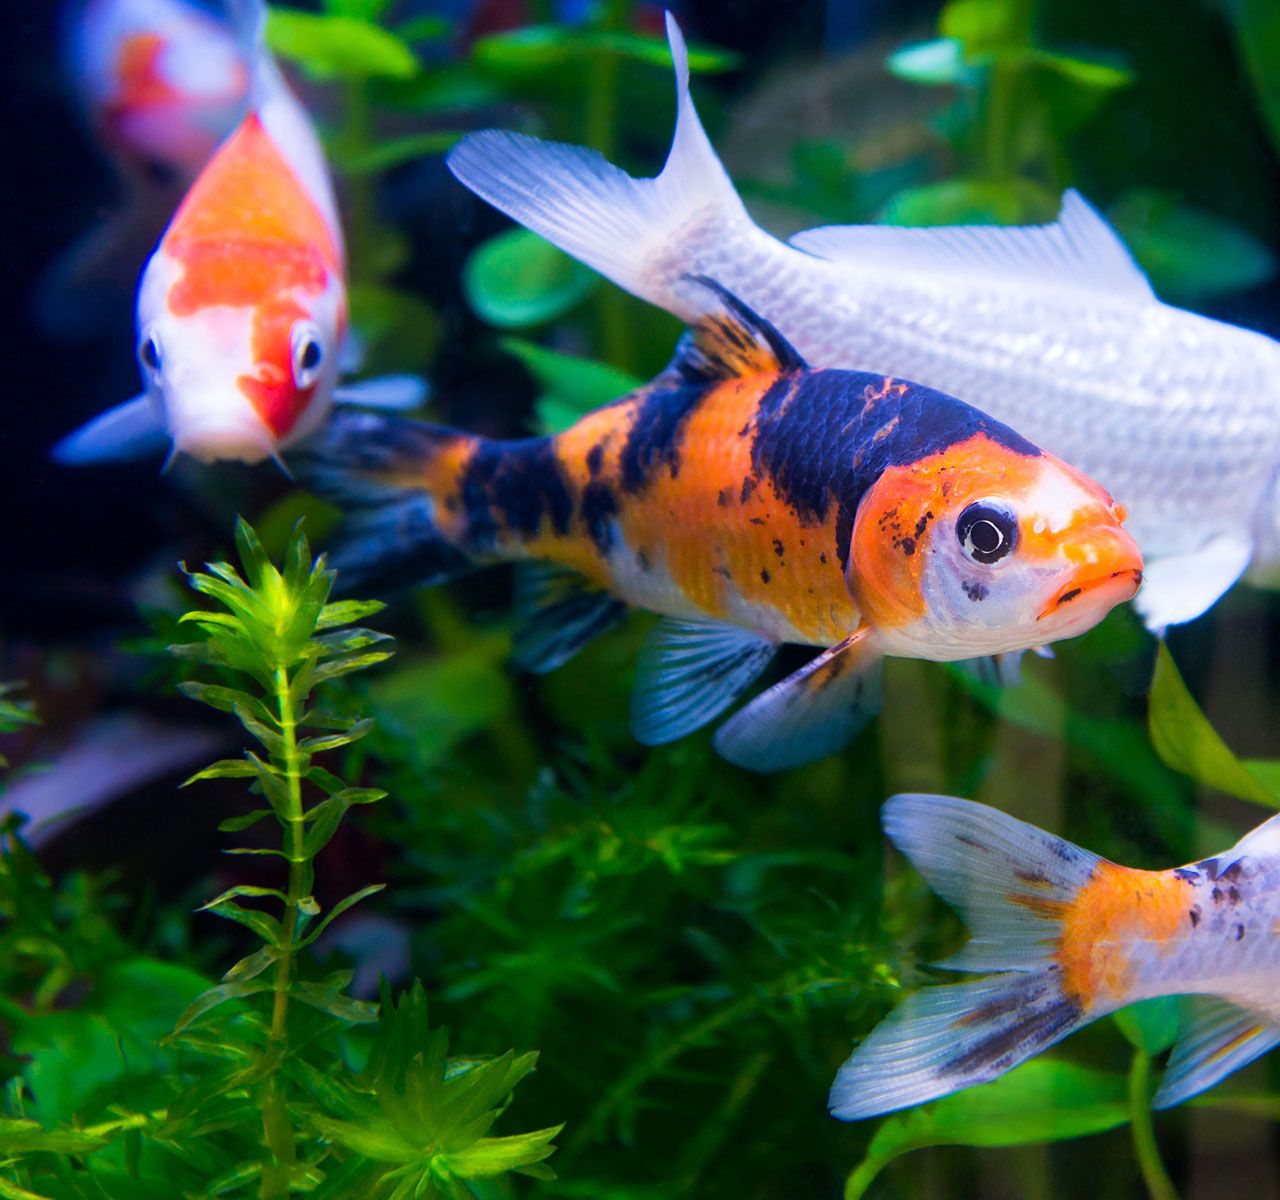 Koi Fish Care & Pond Guide: TIps for Caring for Your Koi Fish